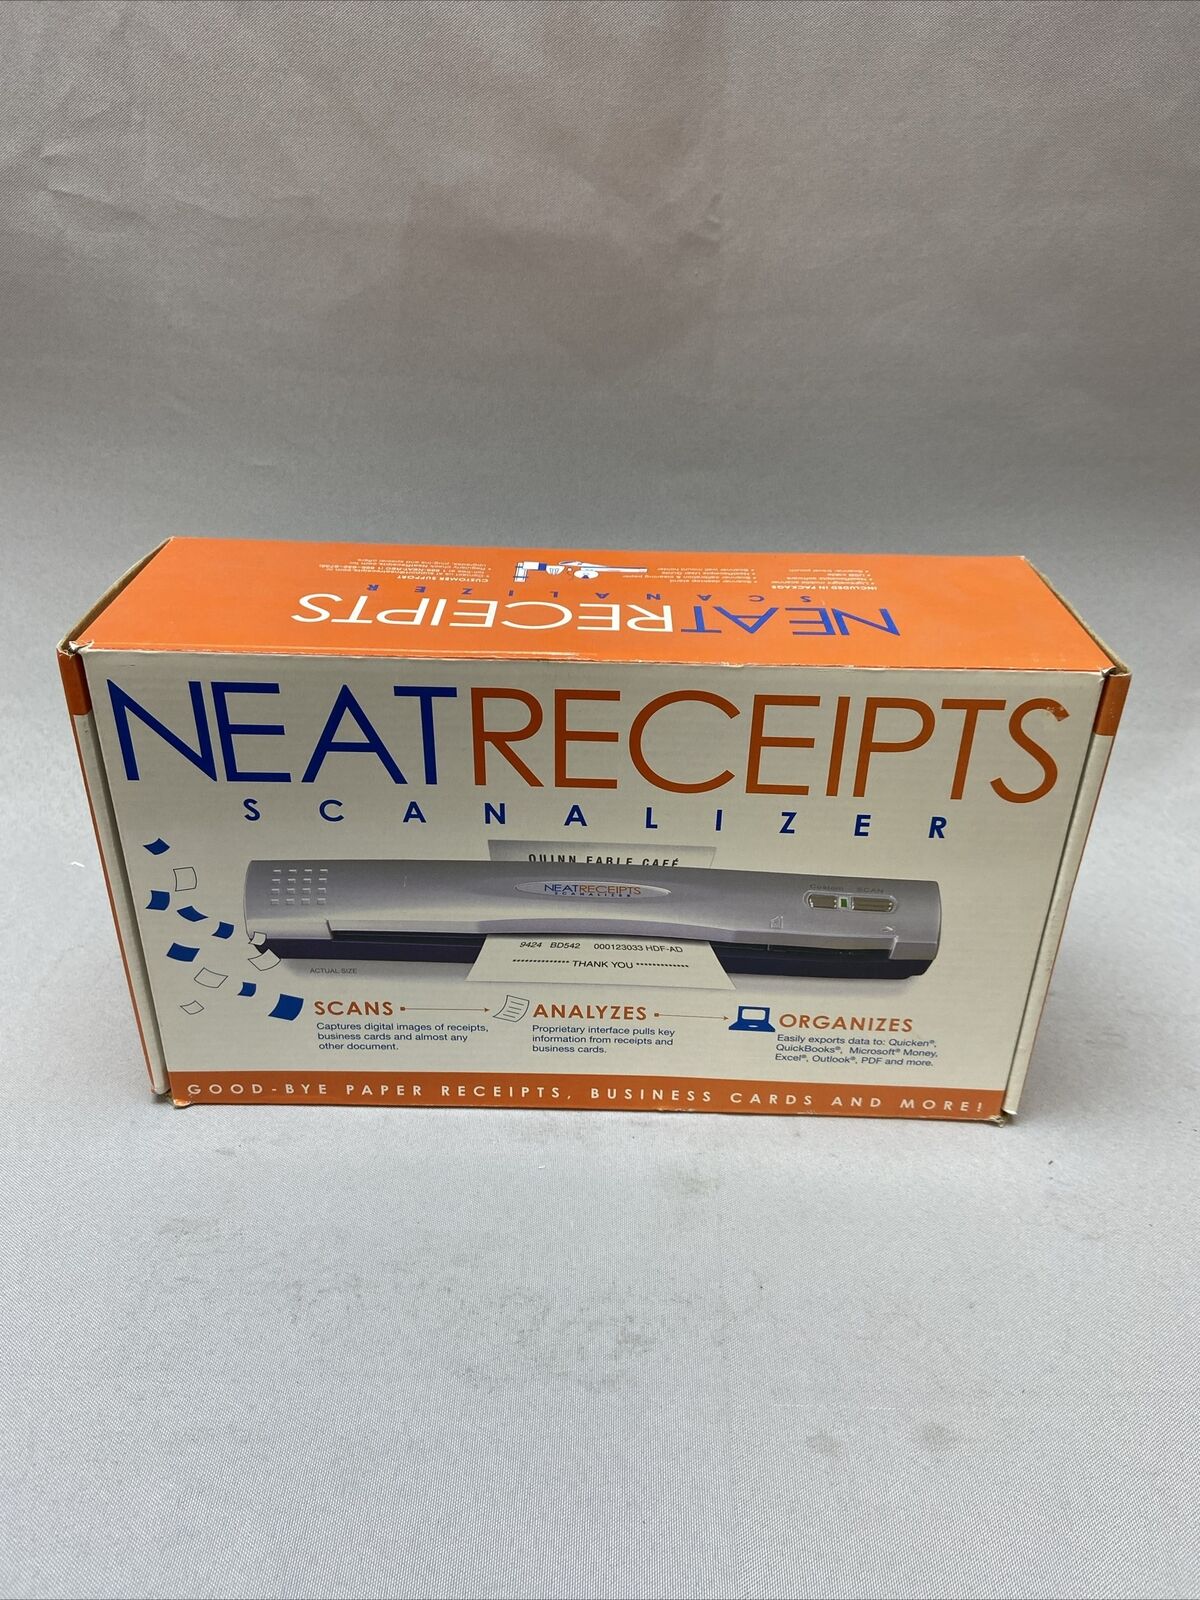 Neat Receipts Mobile Scanner Digital Filing System Scanalizer